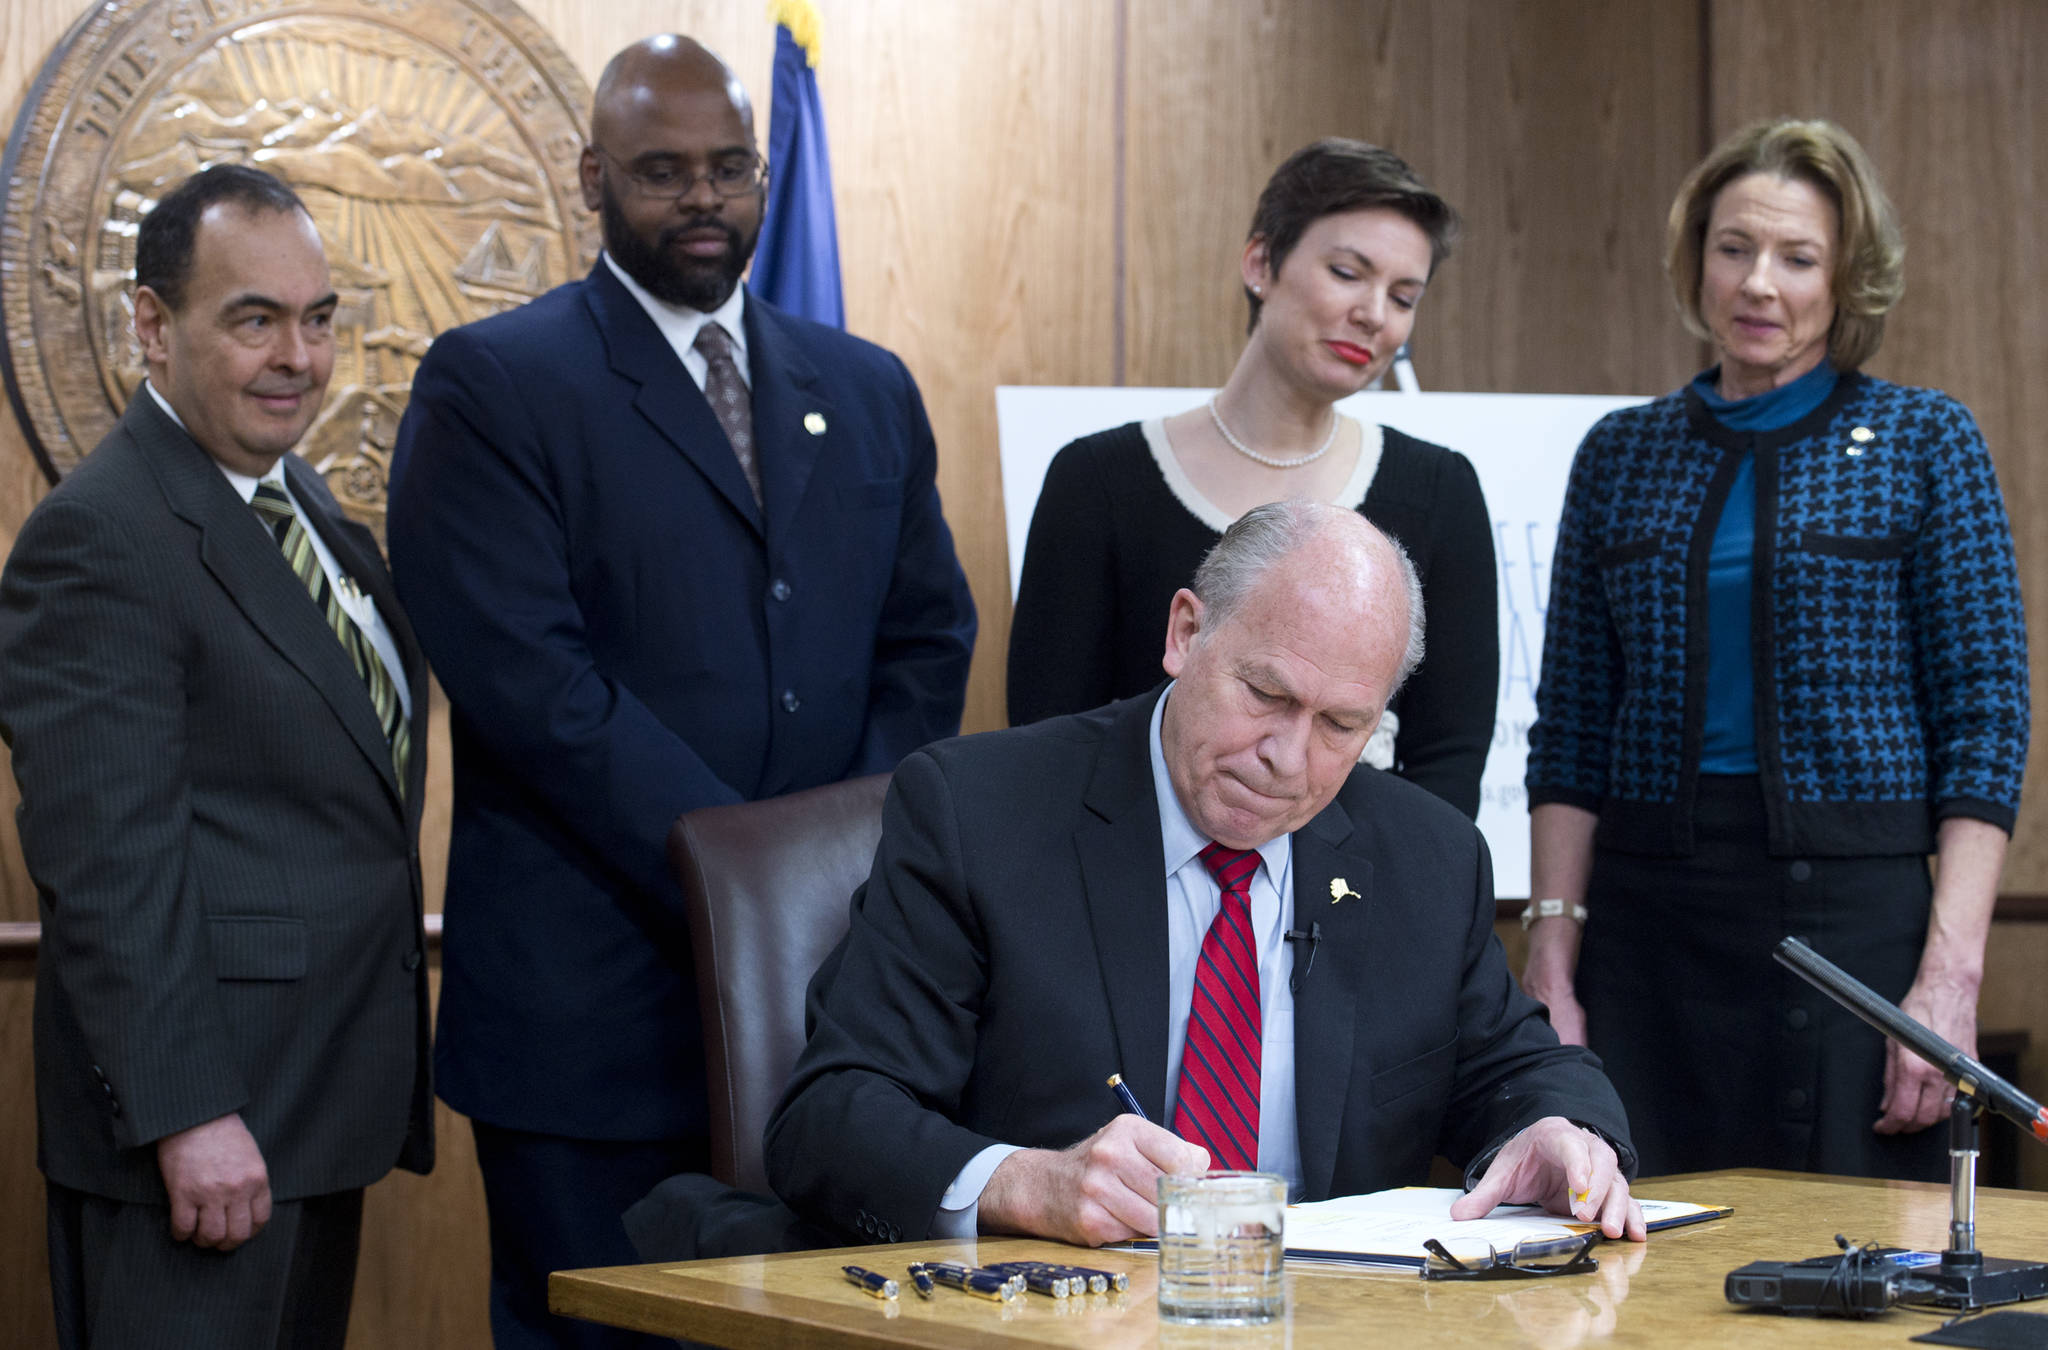 Gov. Bill Walker signs SB 91 in front of Sen. Donald Olson, D-Golovin, left, Sen. David Wilson, R-Wasilla, Rep. Ivy Spohnholz, D-Anchorage, and Sen. Cathy Giessel, R-Anchorage, in his Capitol conference room on Tuesday, March 21, 2017. The bill authorizes the chief medical officer of the Department of Health and Social Services to issue a standing order for the prescription of an opioid overdose drug. (Michael Penn | Juneau Empire)